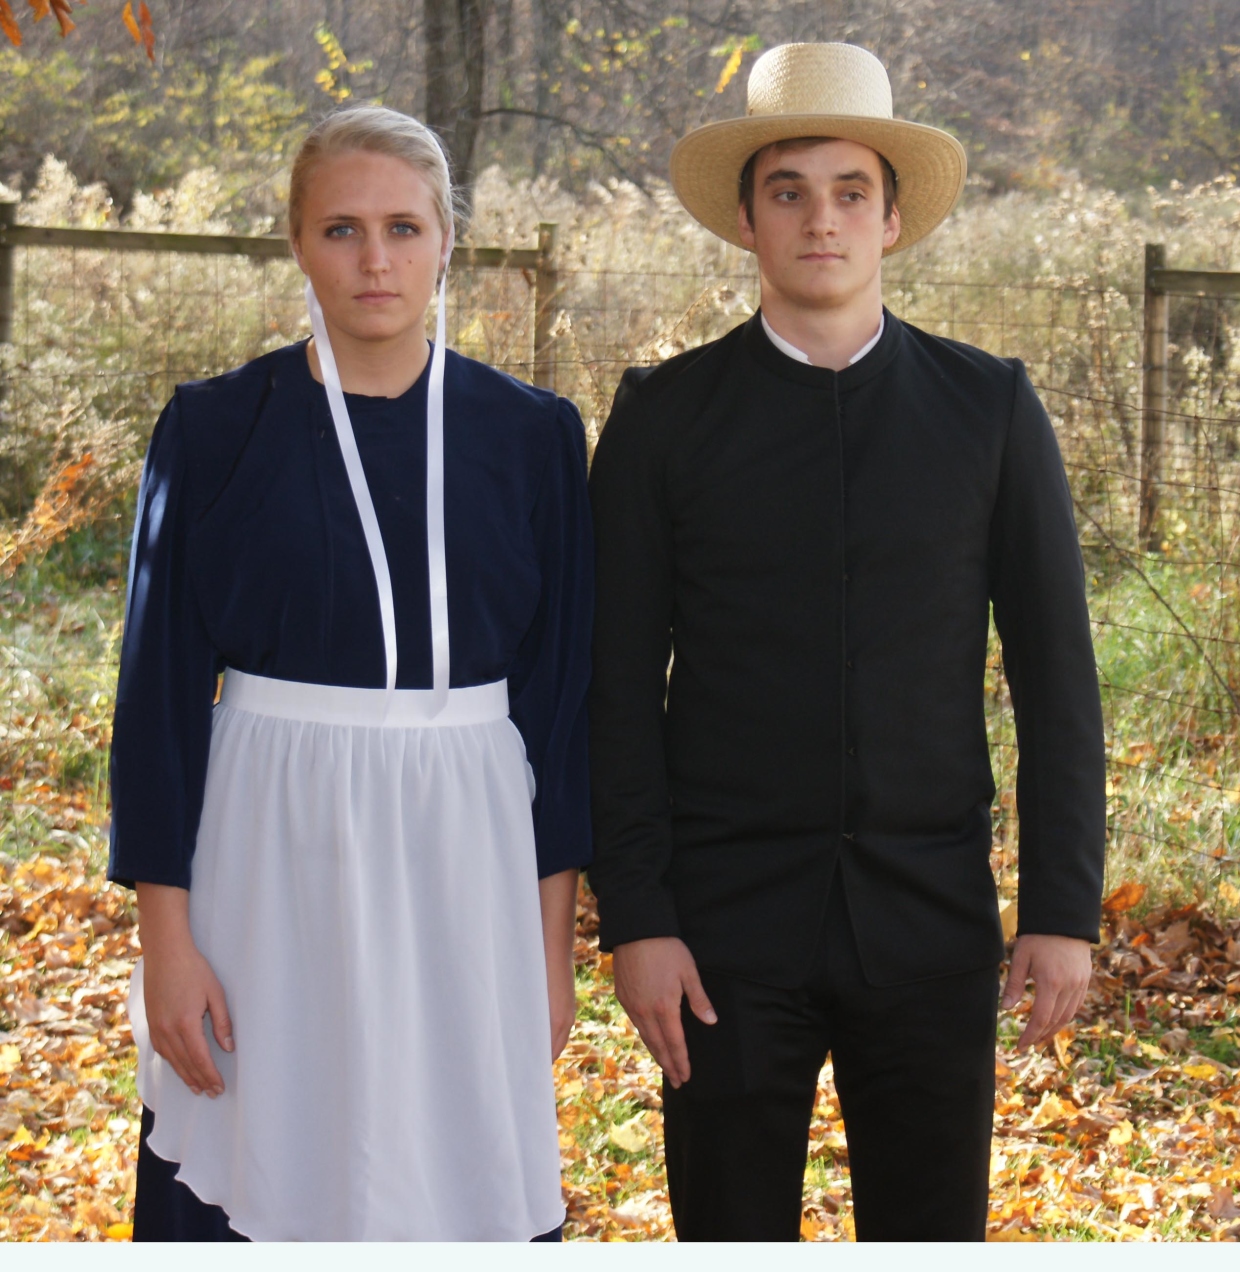 Same Deluxe Outfits as Option 2 but also includes the black Amish travel bo...